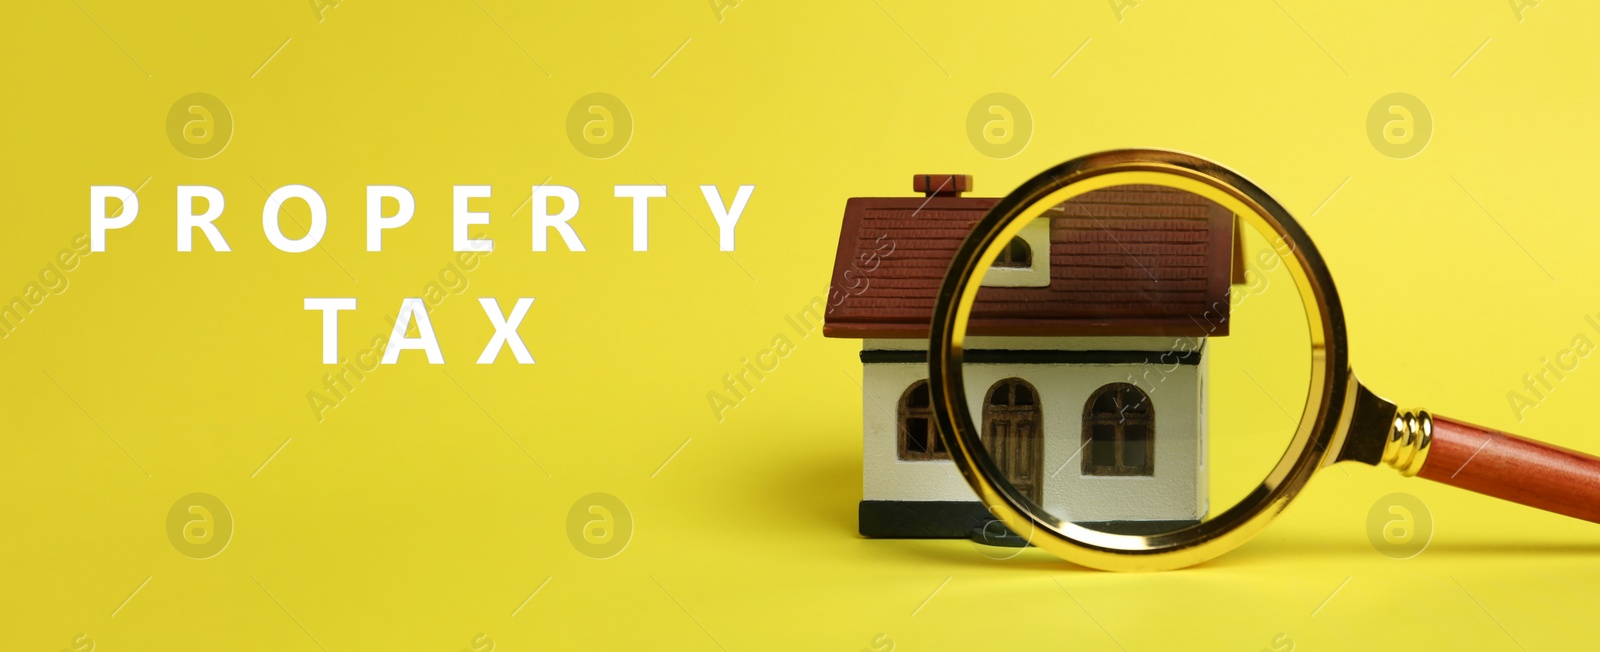 Image of Text Property Tax near magnifying glass and house model on yellow background. Banner design